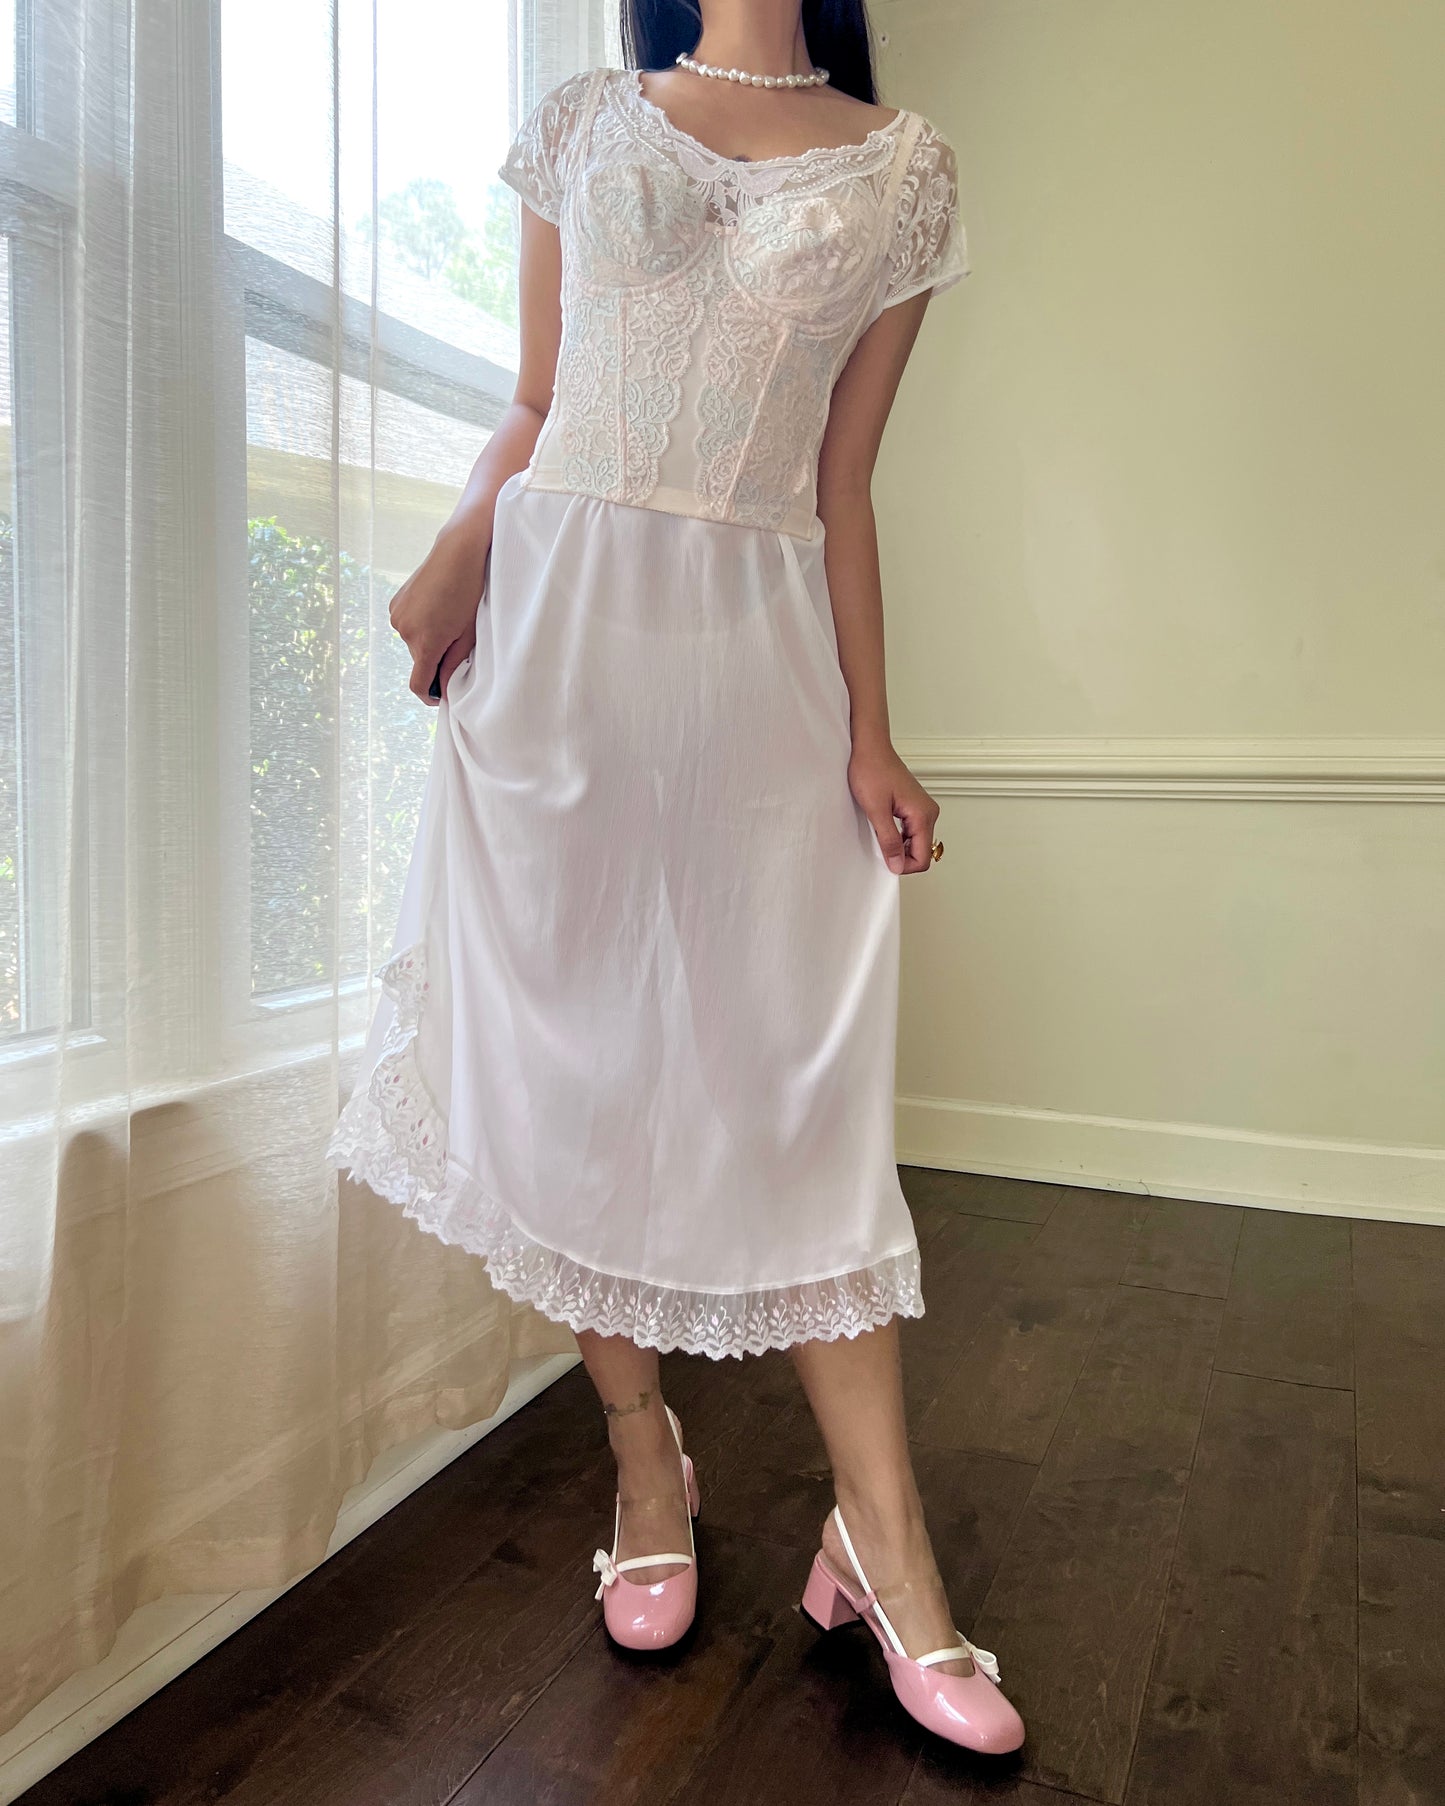 Victorian Inspired Japanese Nightgown in Vintage White featuring Delicate Embroidery